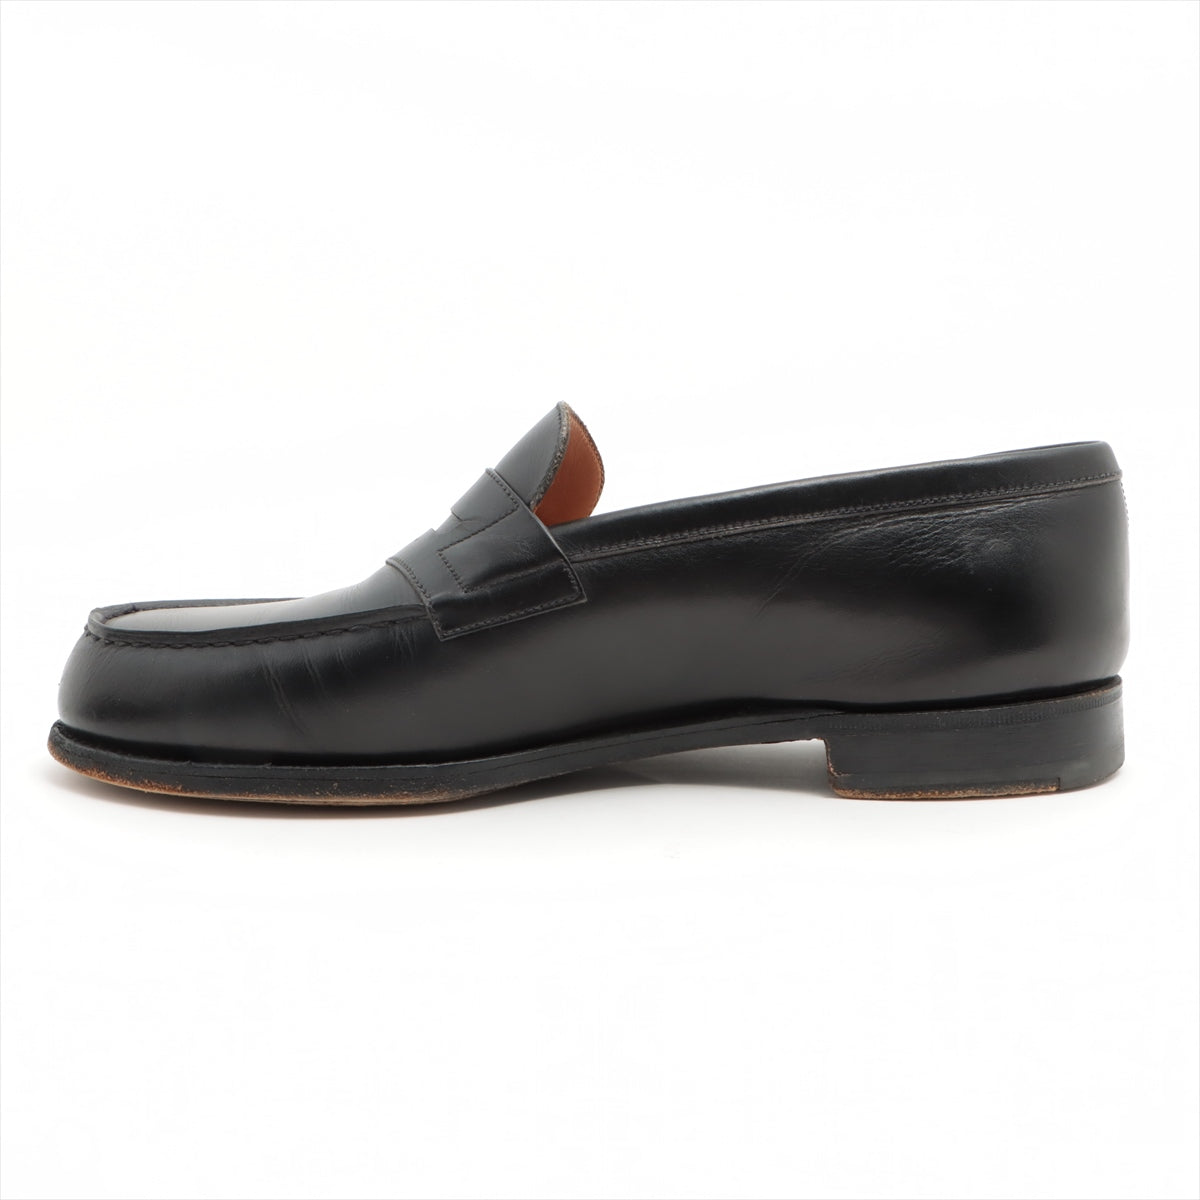 J. M. Weston Leather Loafer 6 1/2E Men's Black 180 signature loafers Genuine shoe tree available